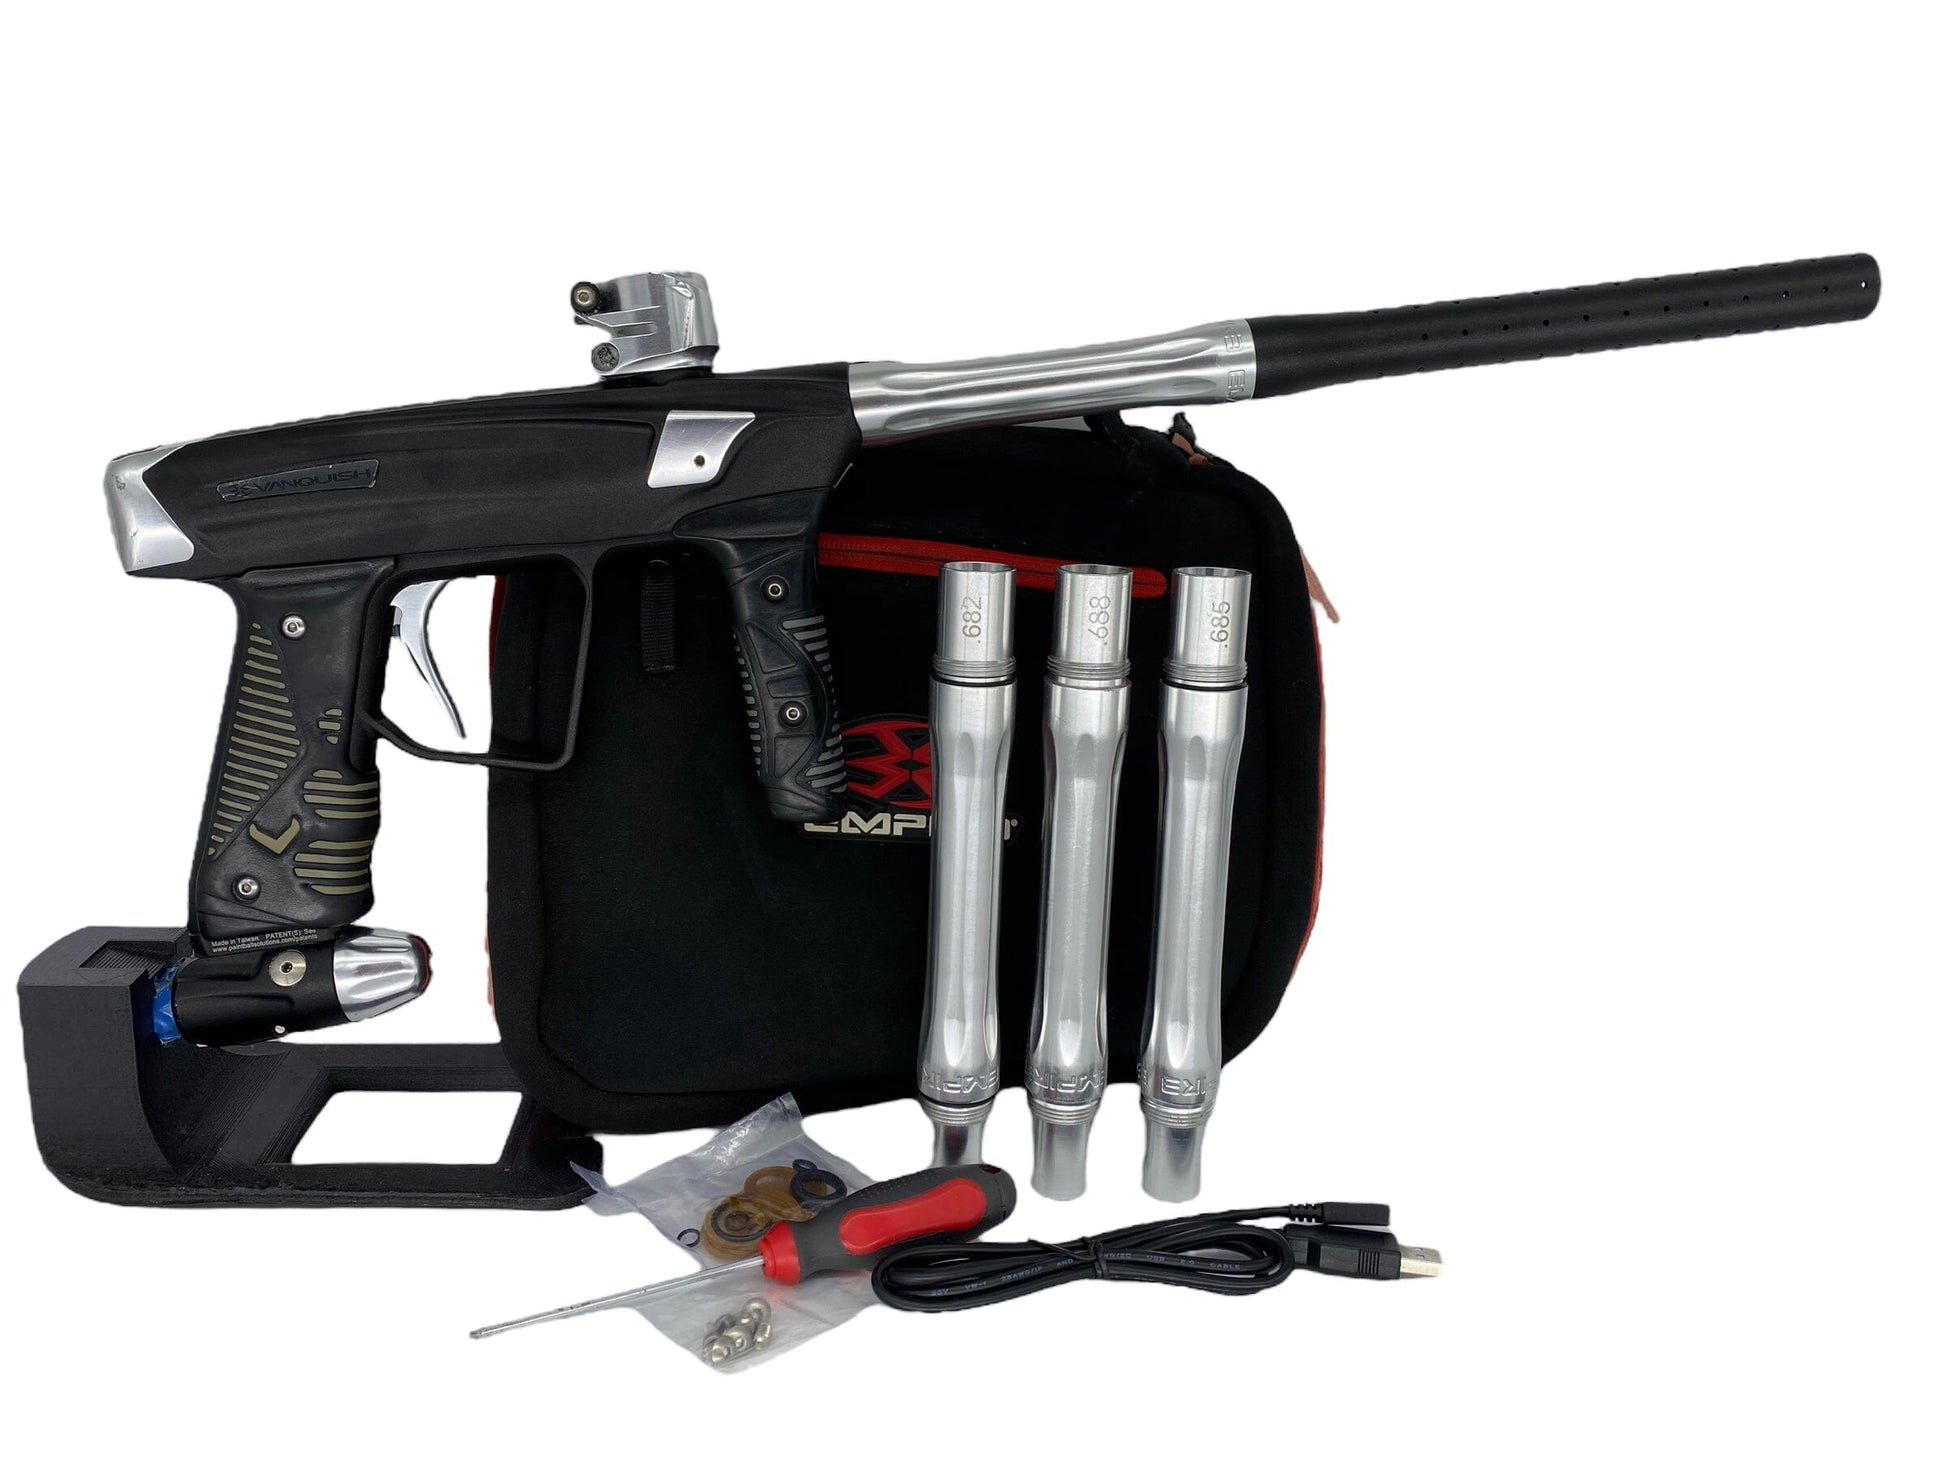 Used Empire Vanquish Gt Paintball Gun from CPXBrosPaintball Buy/Sell/Trade Paintball Markers, Paintball Hoppers, Paintball Masks, and Hormesis Headbands